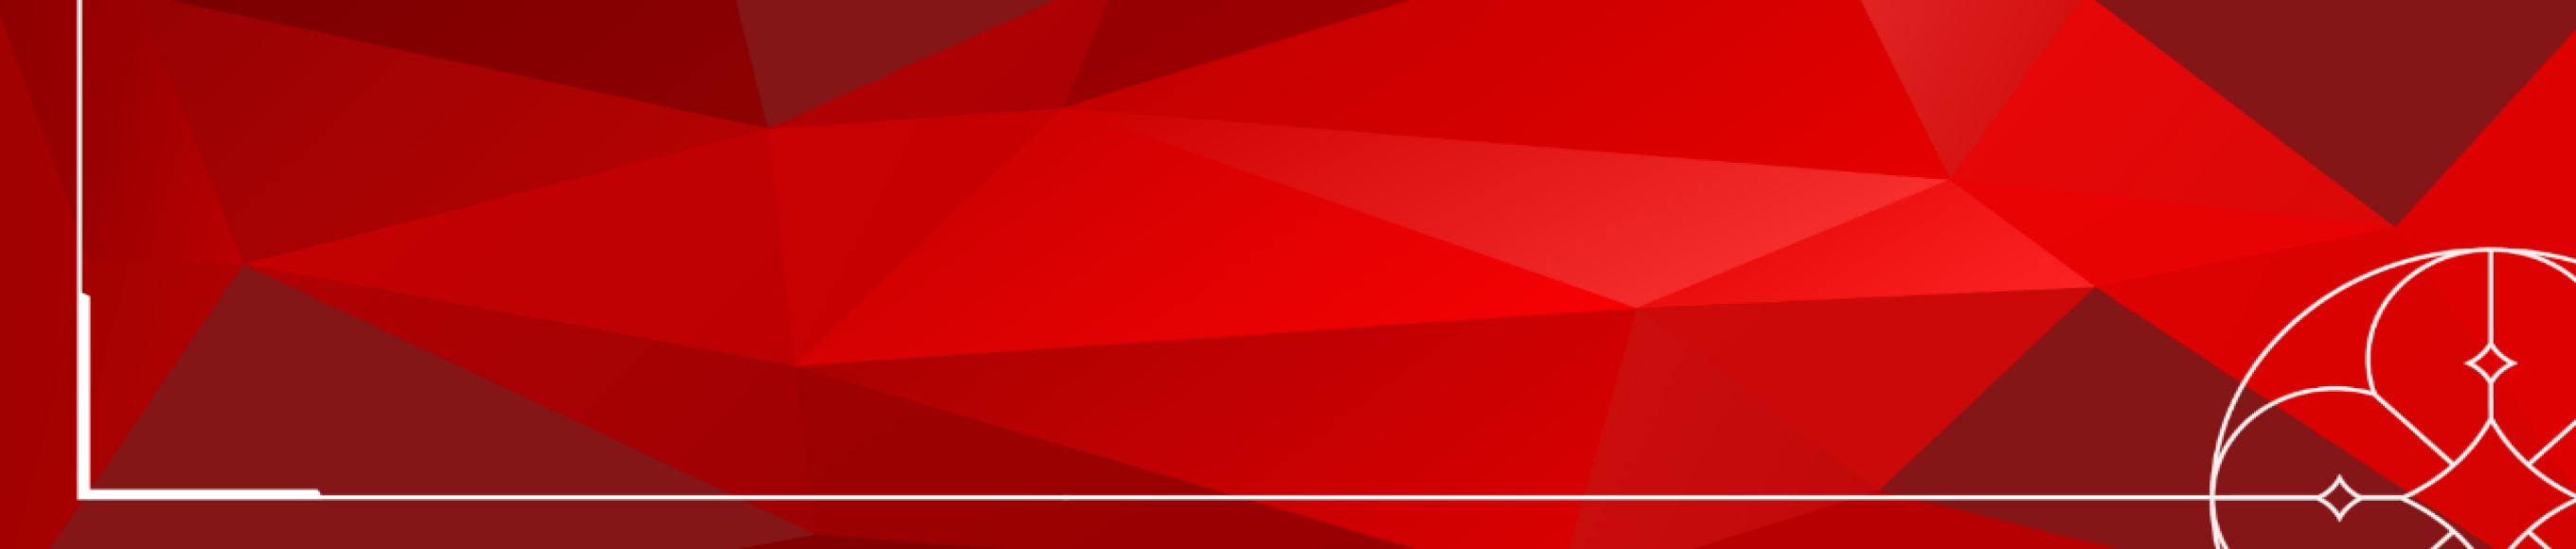 abstract red banner image